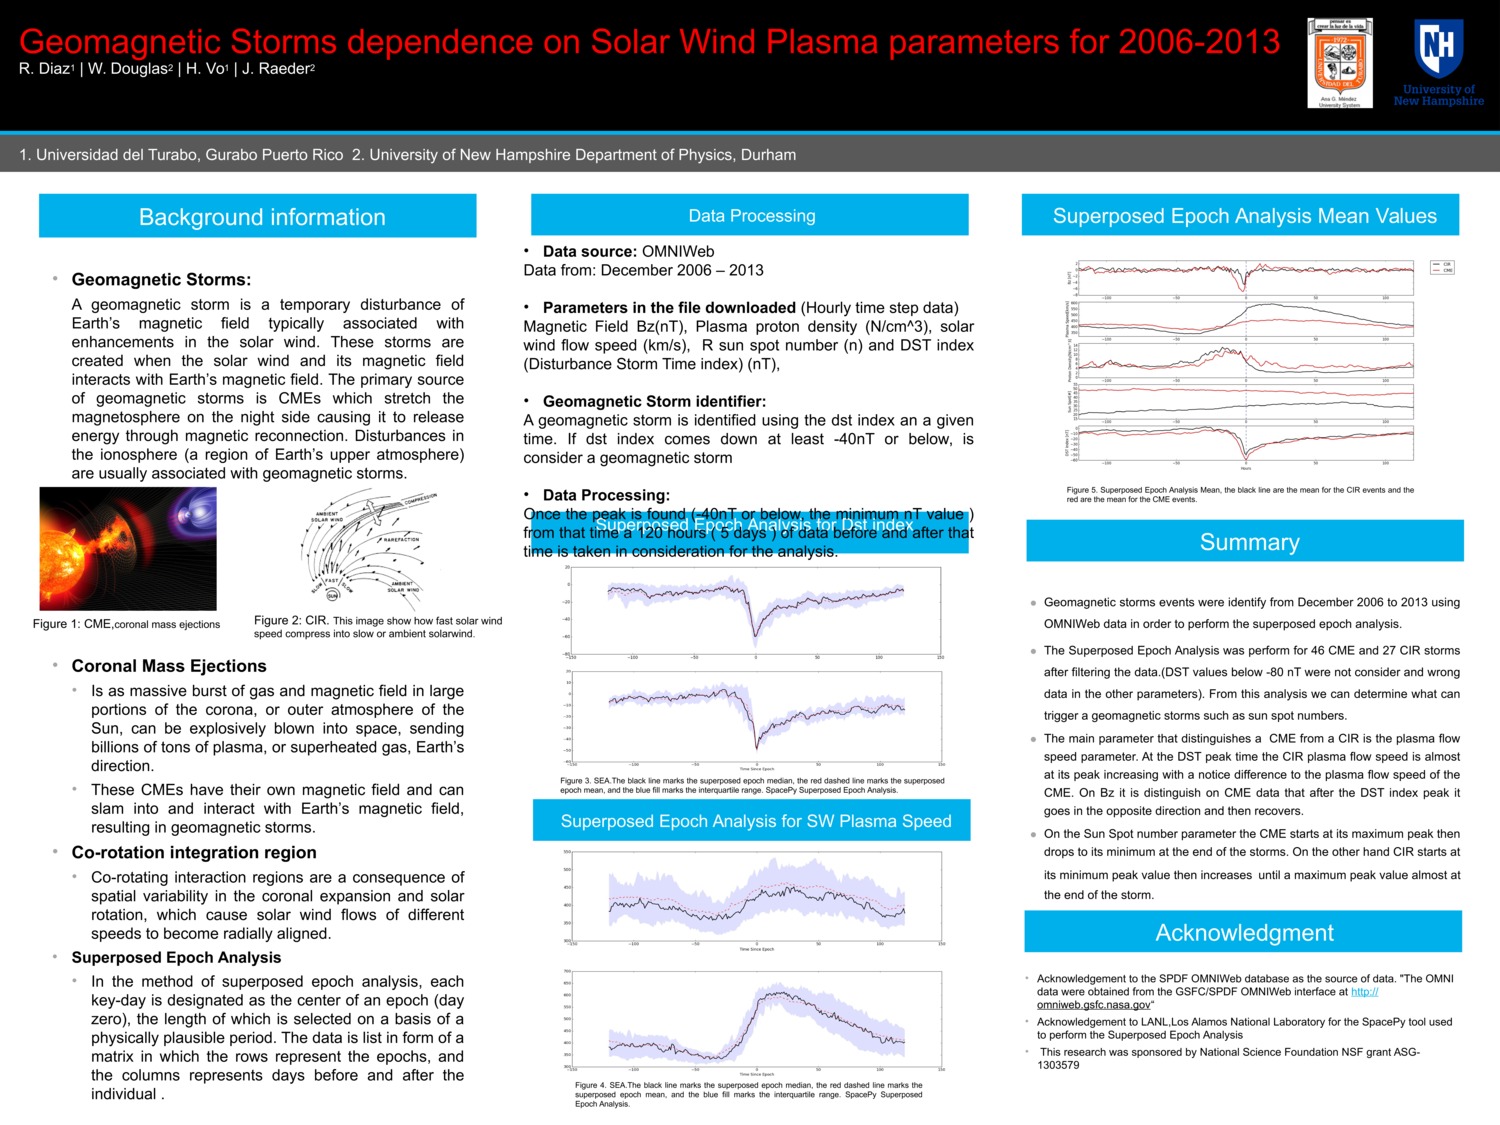 Geomagnetic Storms Dependence On Solar Wind Plasma Parameters For 2006-2013  by rdiaz